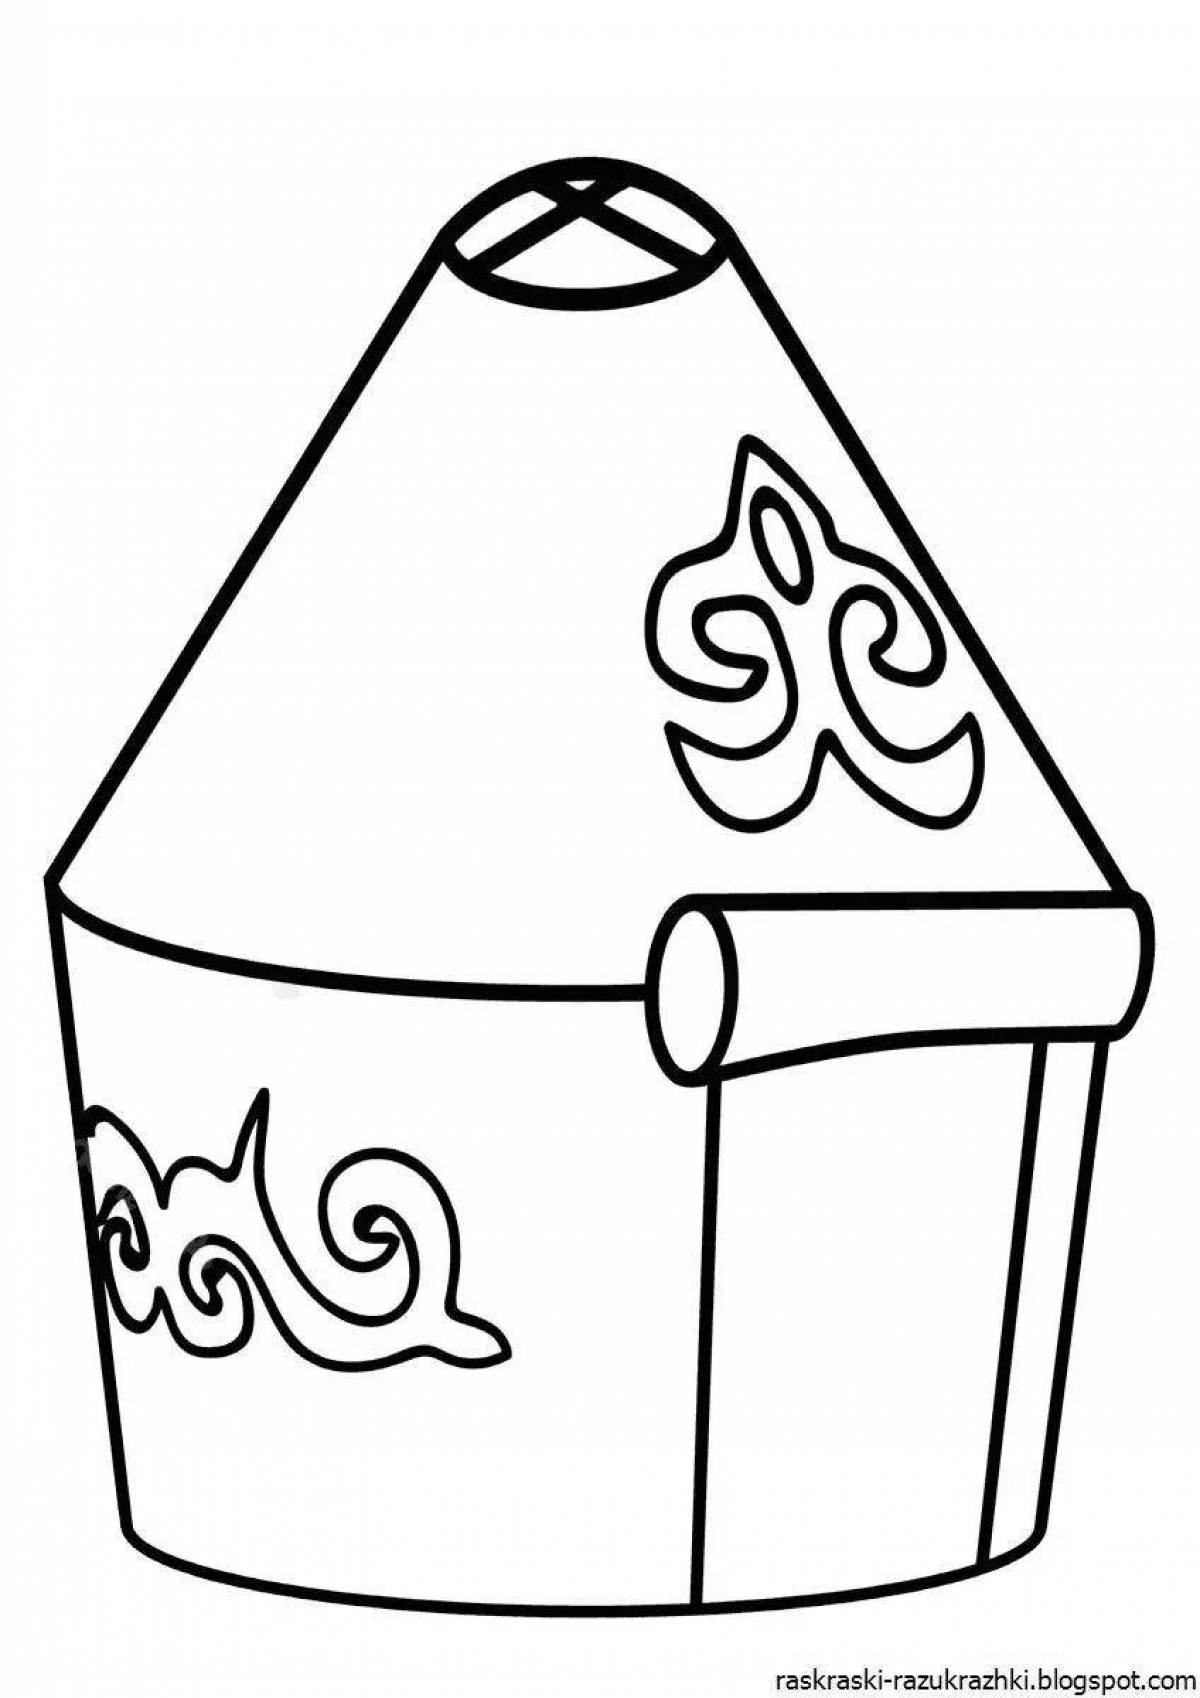 Blessed Nauryz coloring page for kids